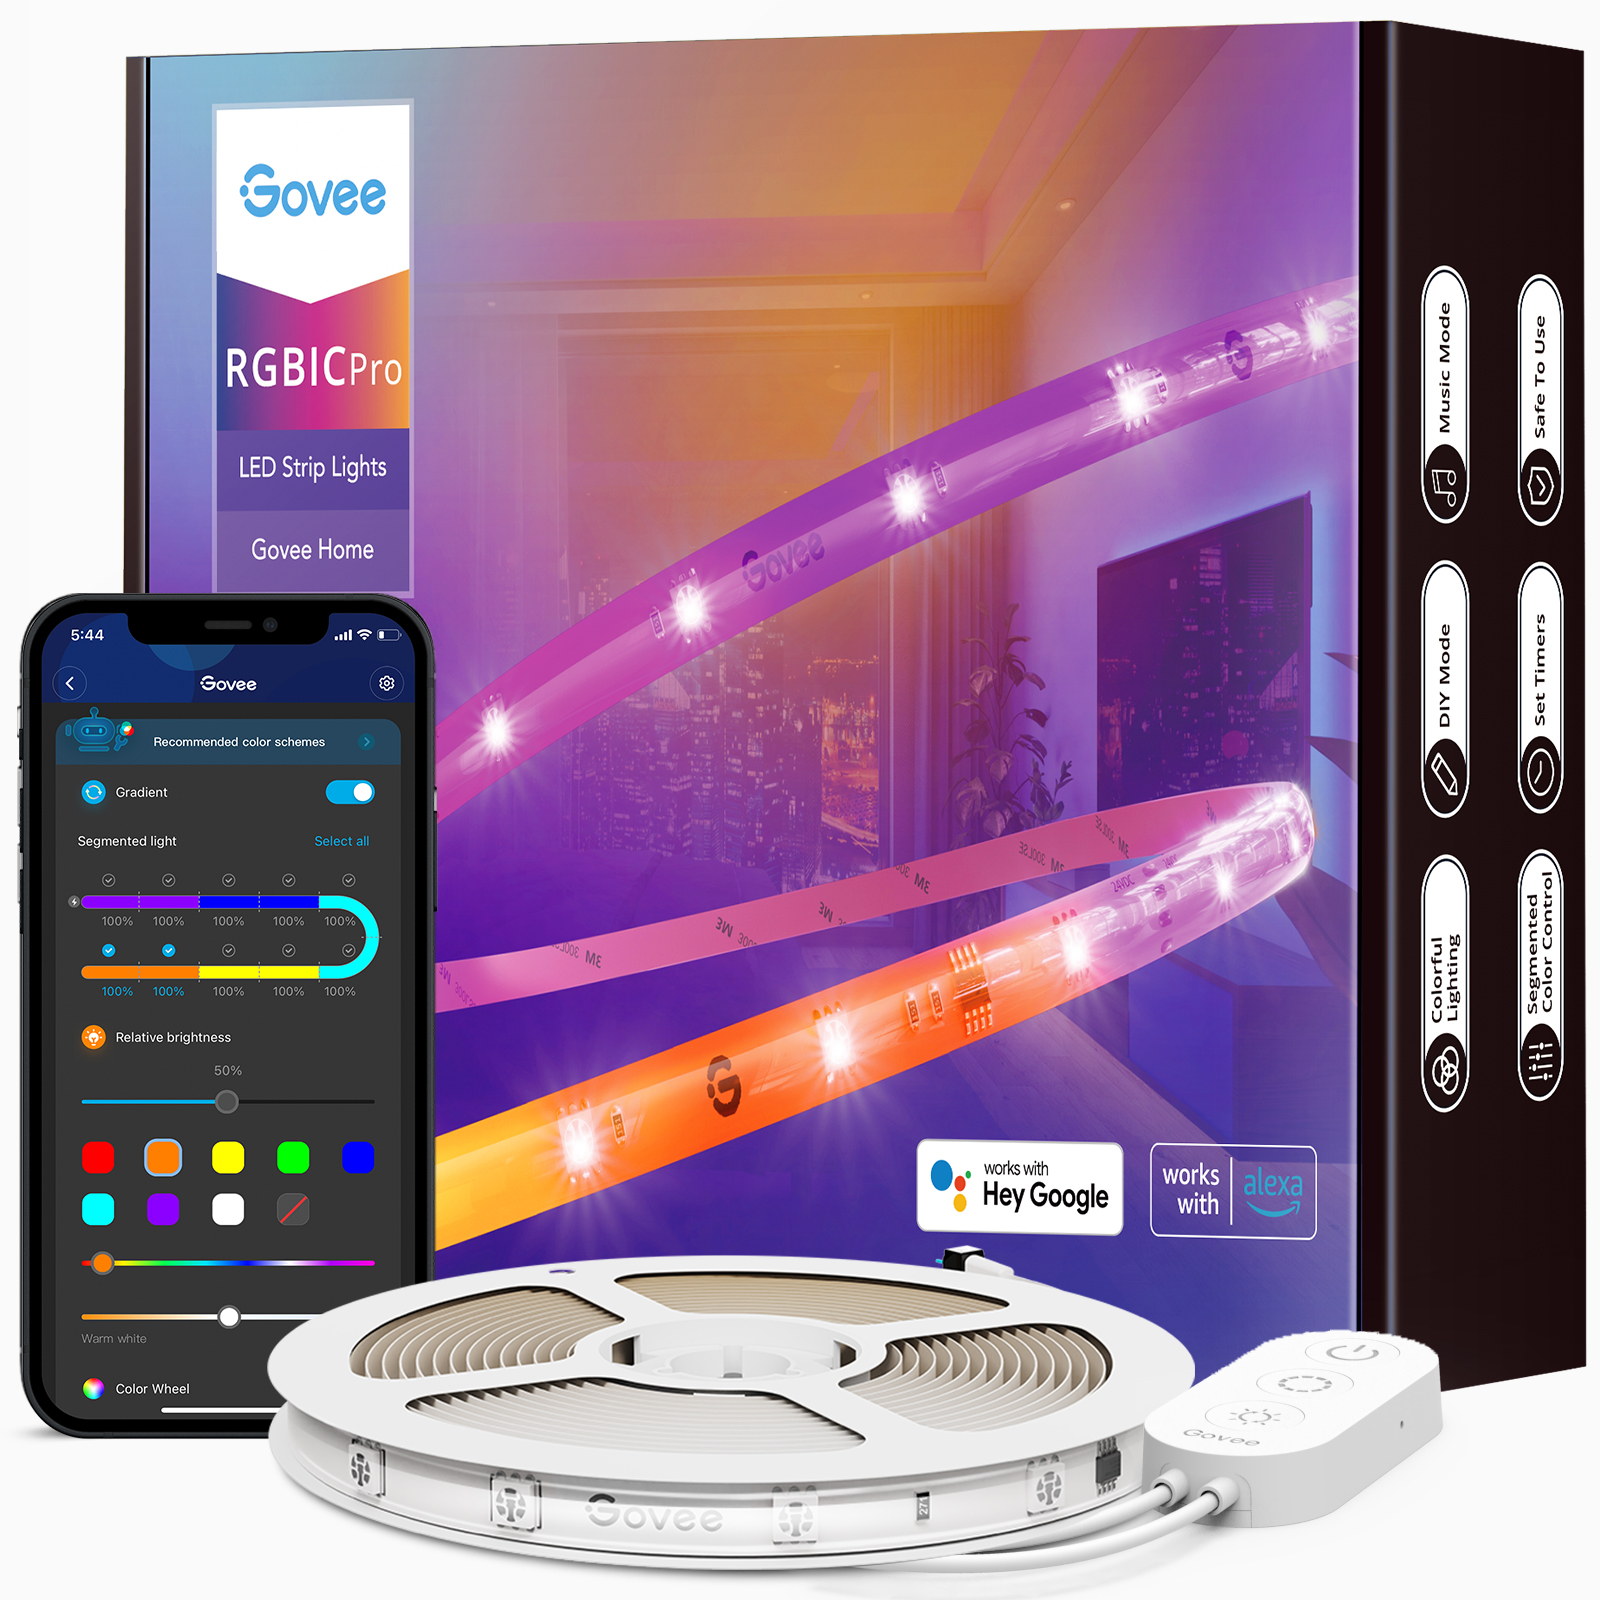  Govee 16.4ft RGBIC LED Strip Lights, WiFi Color Changing LED  Lights Segmented Control, Work with Alexa and Google Assistant, Music LED  Lights for Bedroom, Kitchen, Christmas Party : Tools & Home